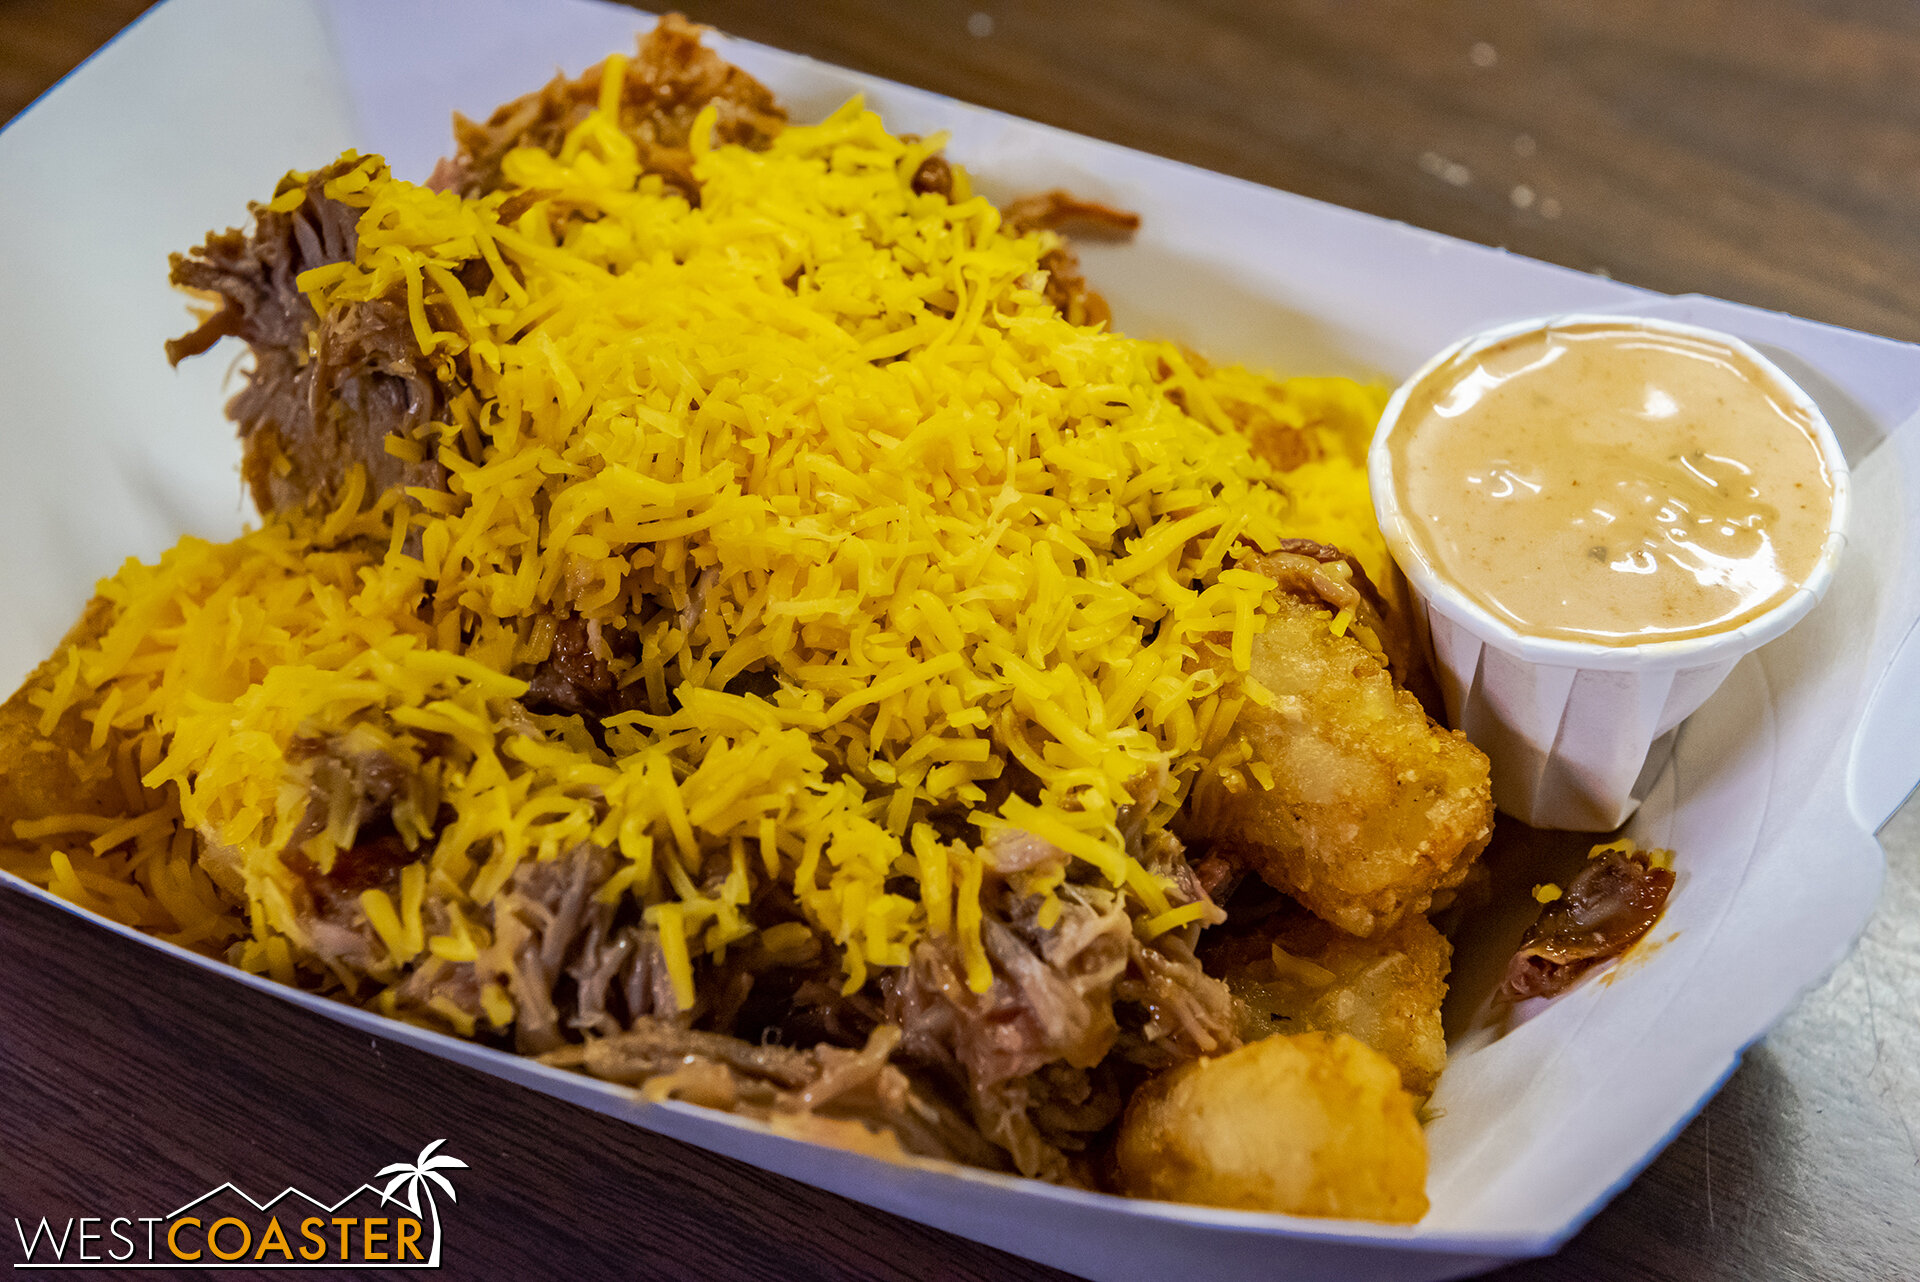  Tater Tots Topped with BBQ Marinated Pulled Pork, Chipotle Ranch, and Shredded Cheddar Cheese, from Sutter’s Grill or Calico Fry Co. 